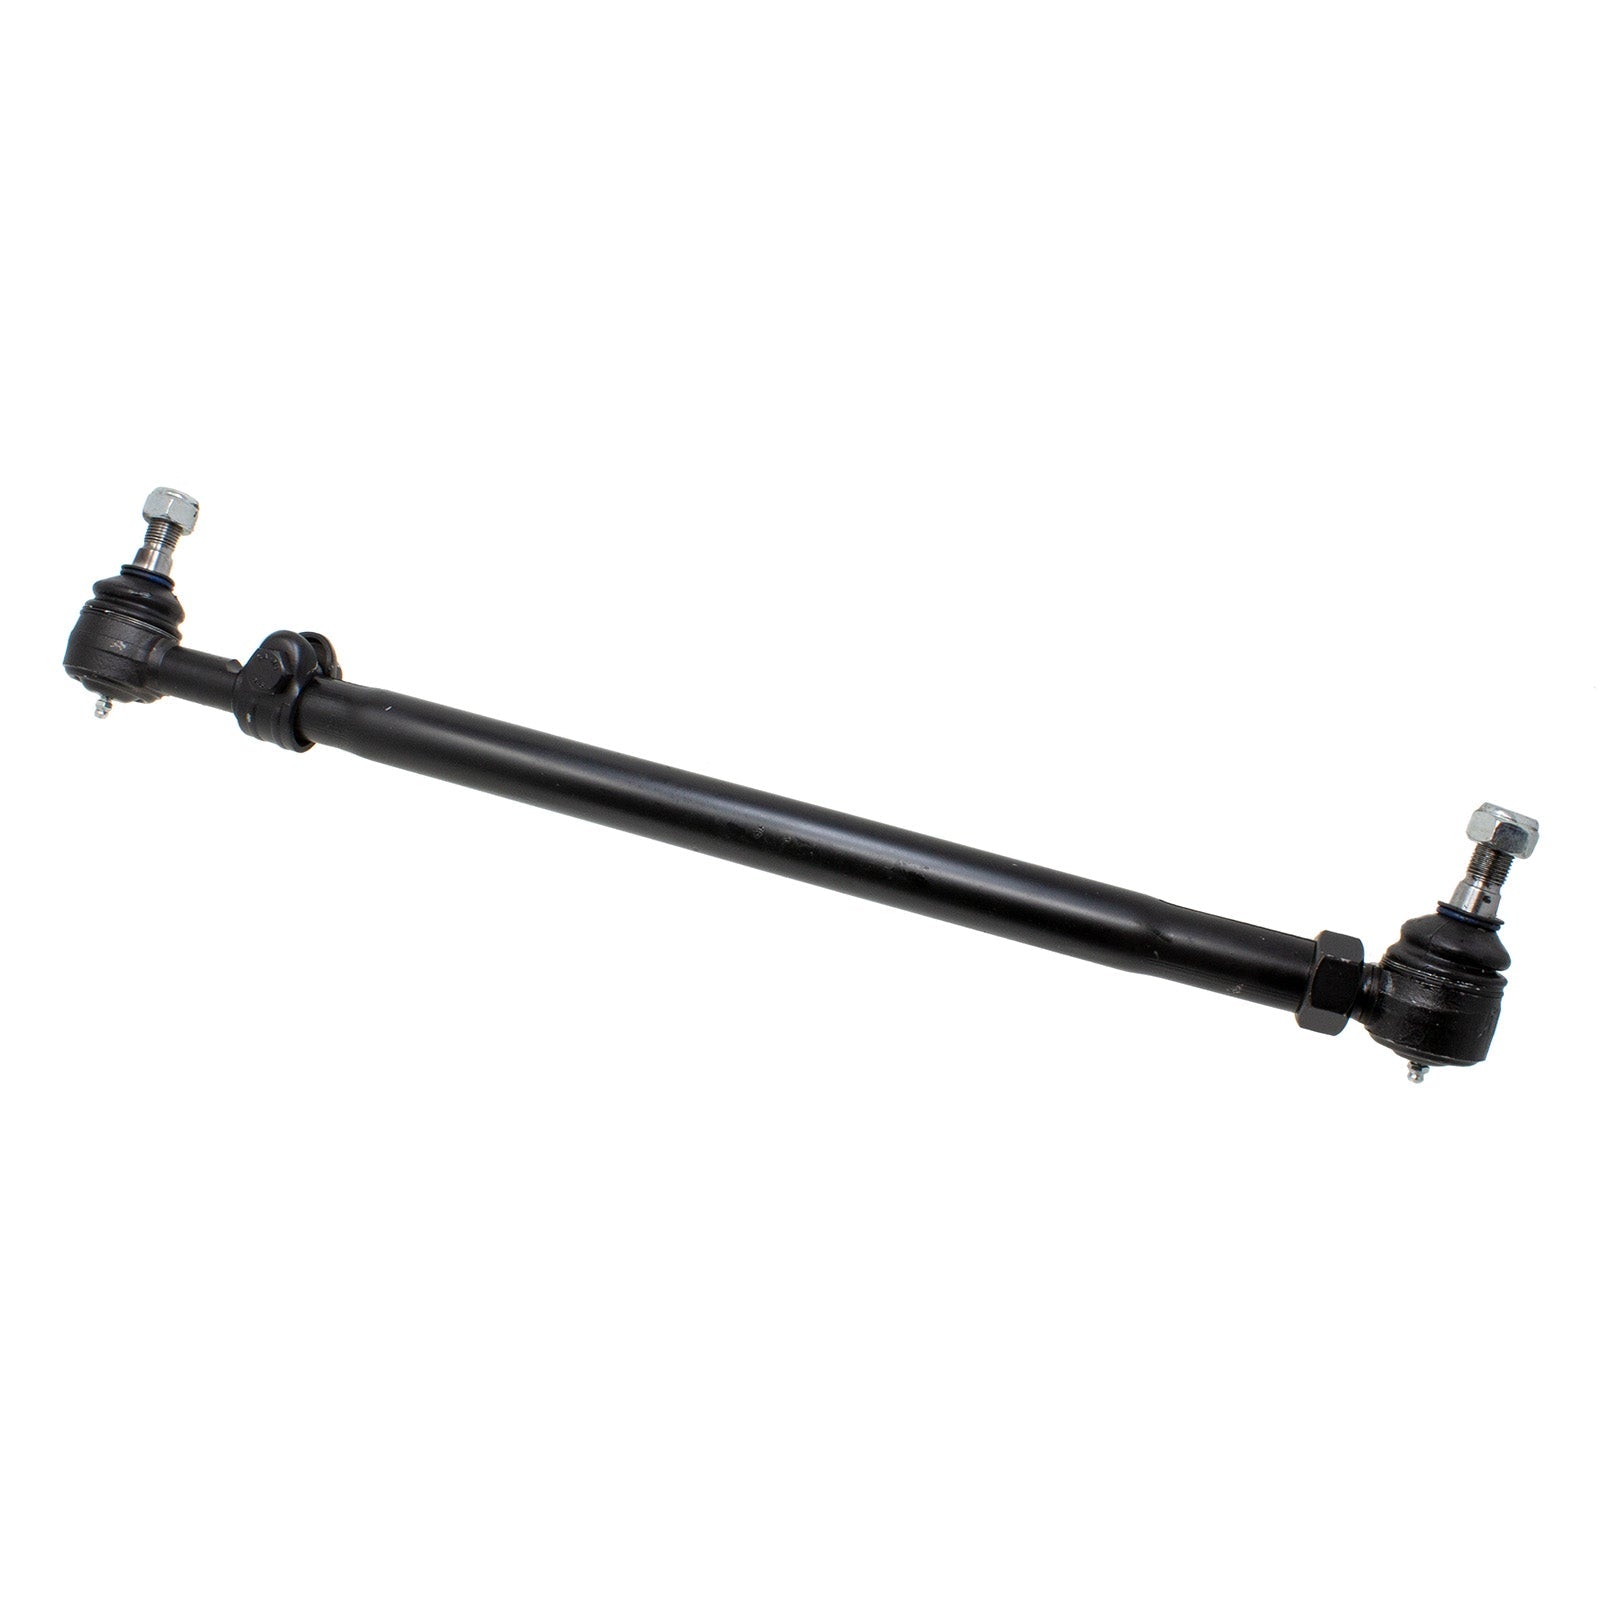 Duraforce 107023AS, Tie Rod Assembly For Oliver